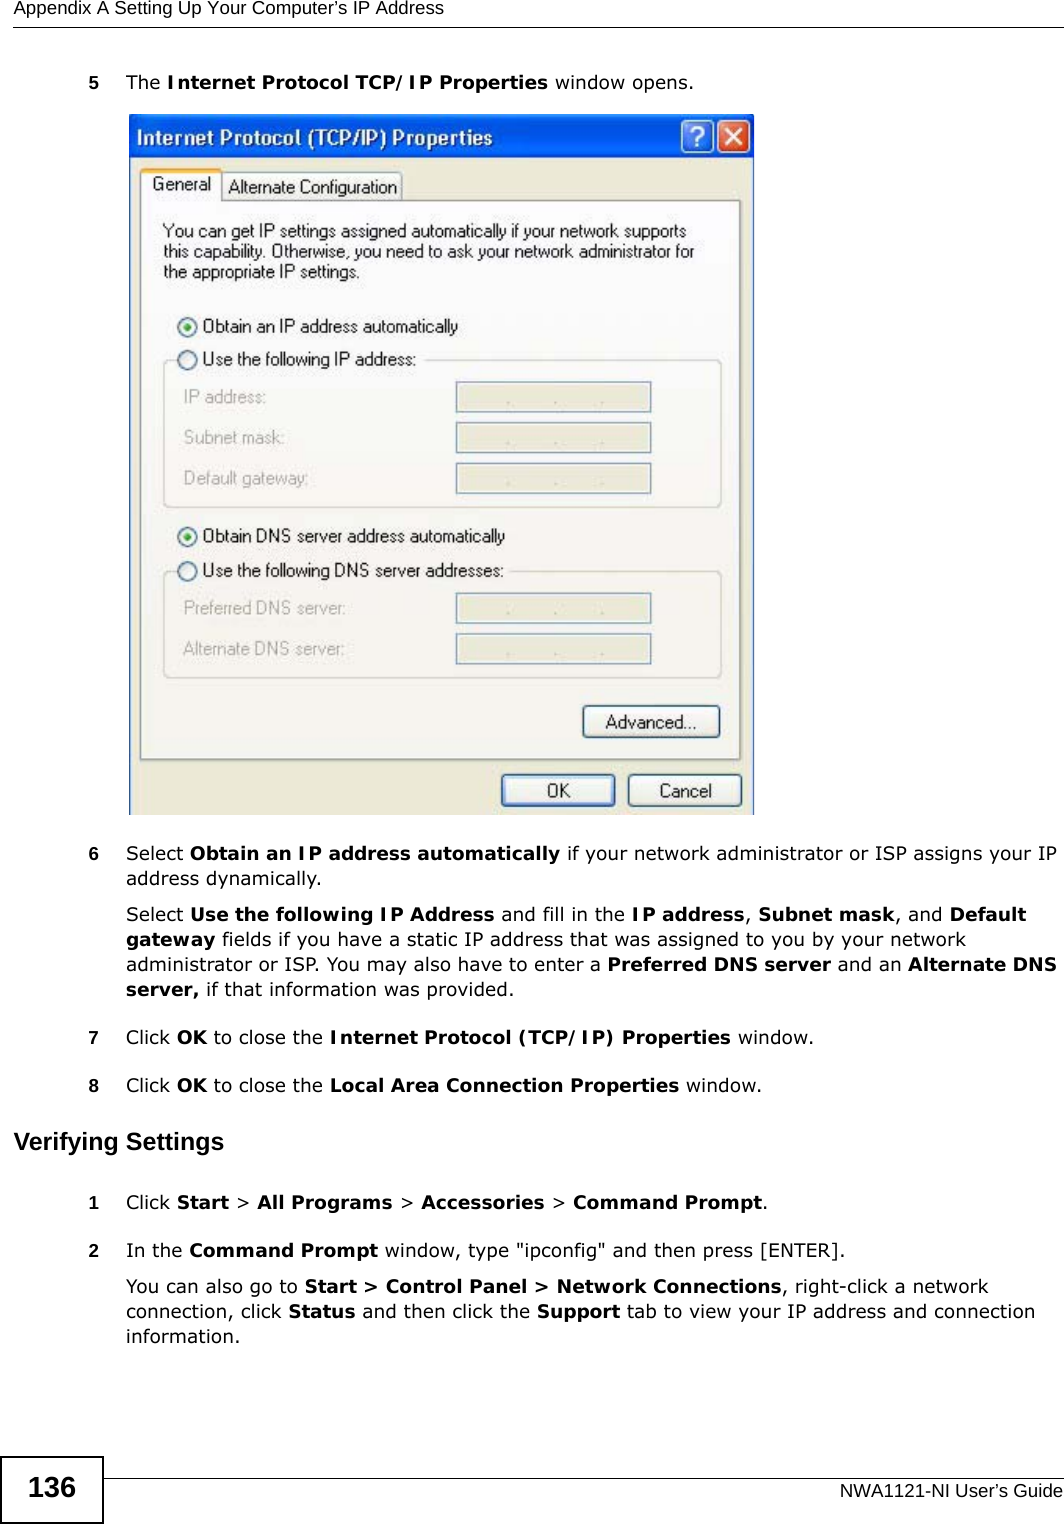 Appendix A Setting Up Your Computer’s IP AddressNWA1121-NI User’s Guide1365The Internet Protocol TCP/IP Properties window opens.6Select Obtain an IP address automatically if your network administrator or ISP assigns your IP address dynamically.Select Use the following IP Address and fill in the IP address, Subnet mask, and Default gateway fields if you have a static IP address that was assigned to you by your network administrator or ISP. You may also have to enter a Preferred DNS server and an Alternate DNS server, if that information was provided.7Click OK to close the Internet Protocol (TCP/IP) Properties window.8Click OK to close the Local Area Connection Properties window.Verifying Settings1Click Start &gt; All Programs &gt; Accessories &gt; Command Prompt.2In the Command Prompt window, type &quot;ipconfig&quot; and then press [ENTER]. You can also go to Start &gt; Control Panel &gt; Network Connections, right-click a network connection, click Status and then click the Support tab to view your IP address and connection information.